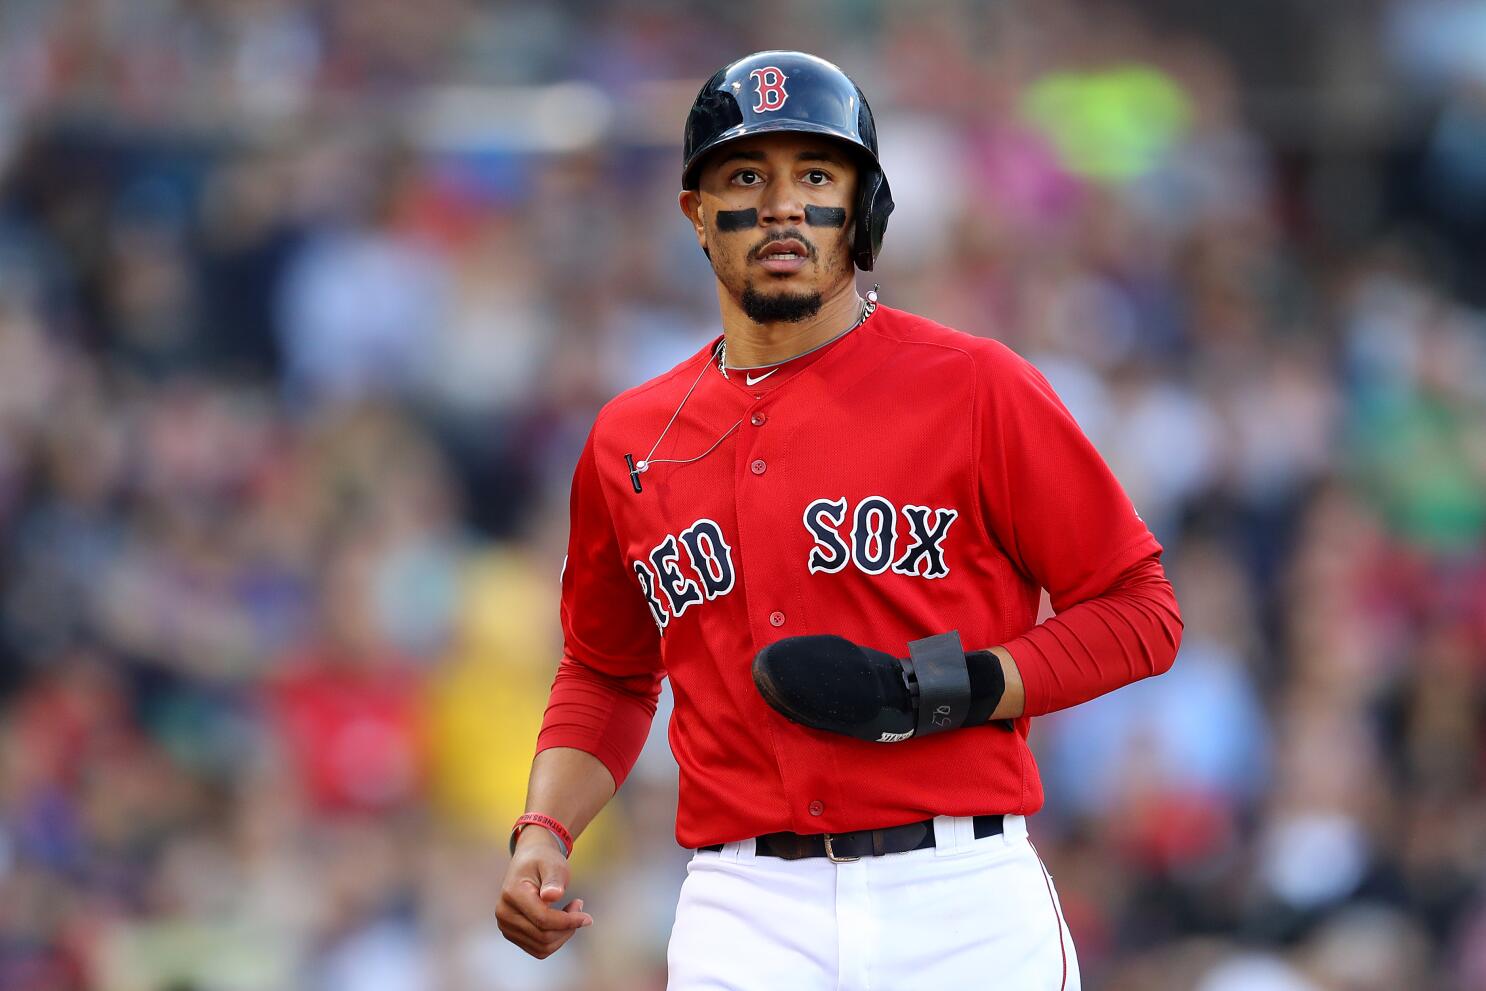 Dodgers' trade targets could include Mookie Betts, Kris Bryant